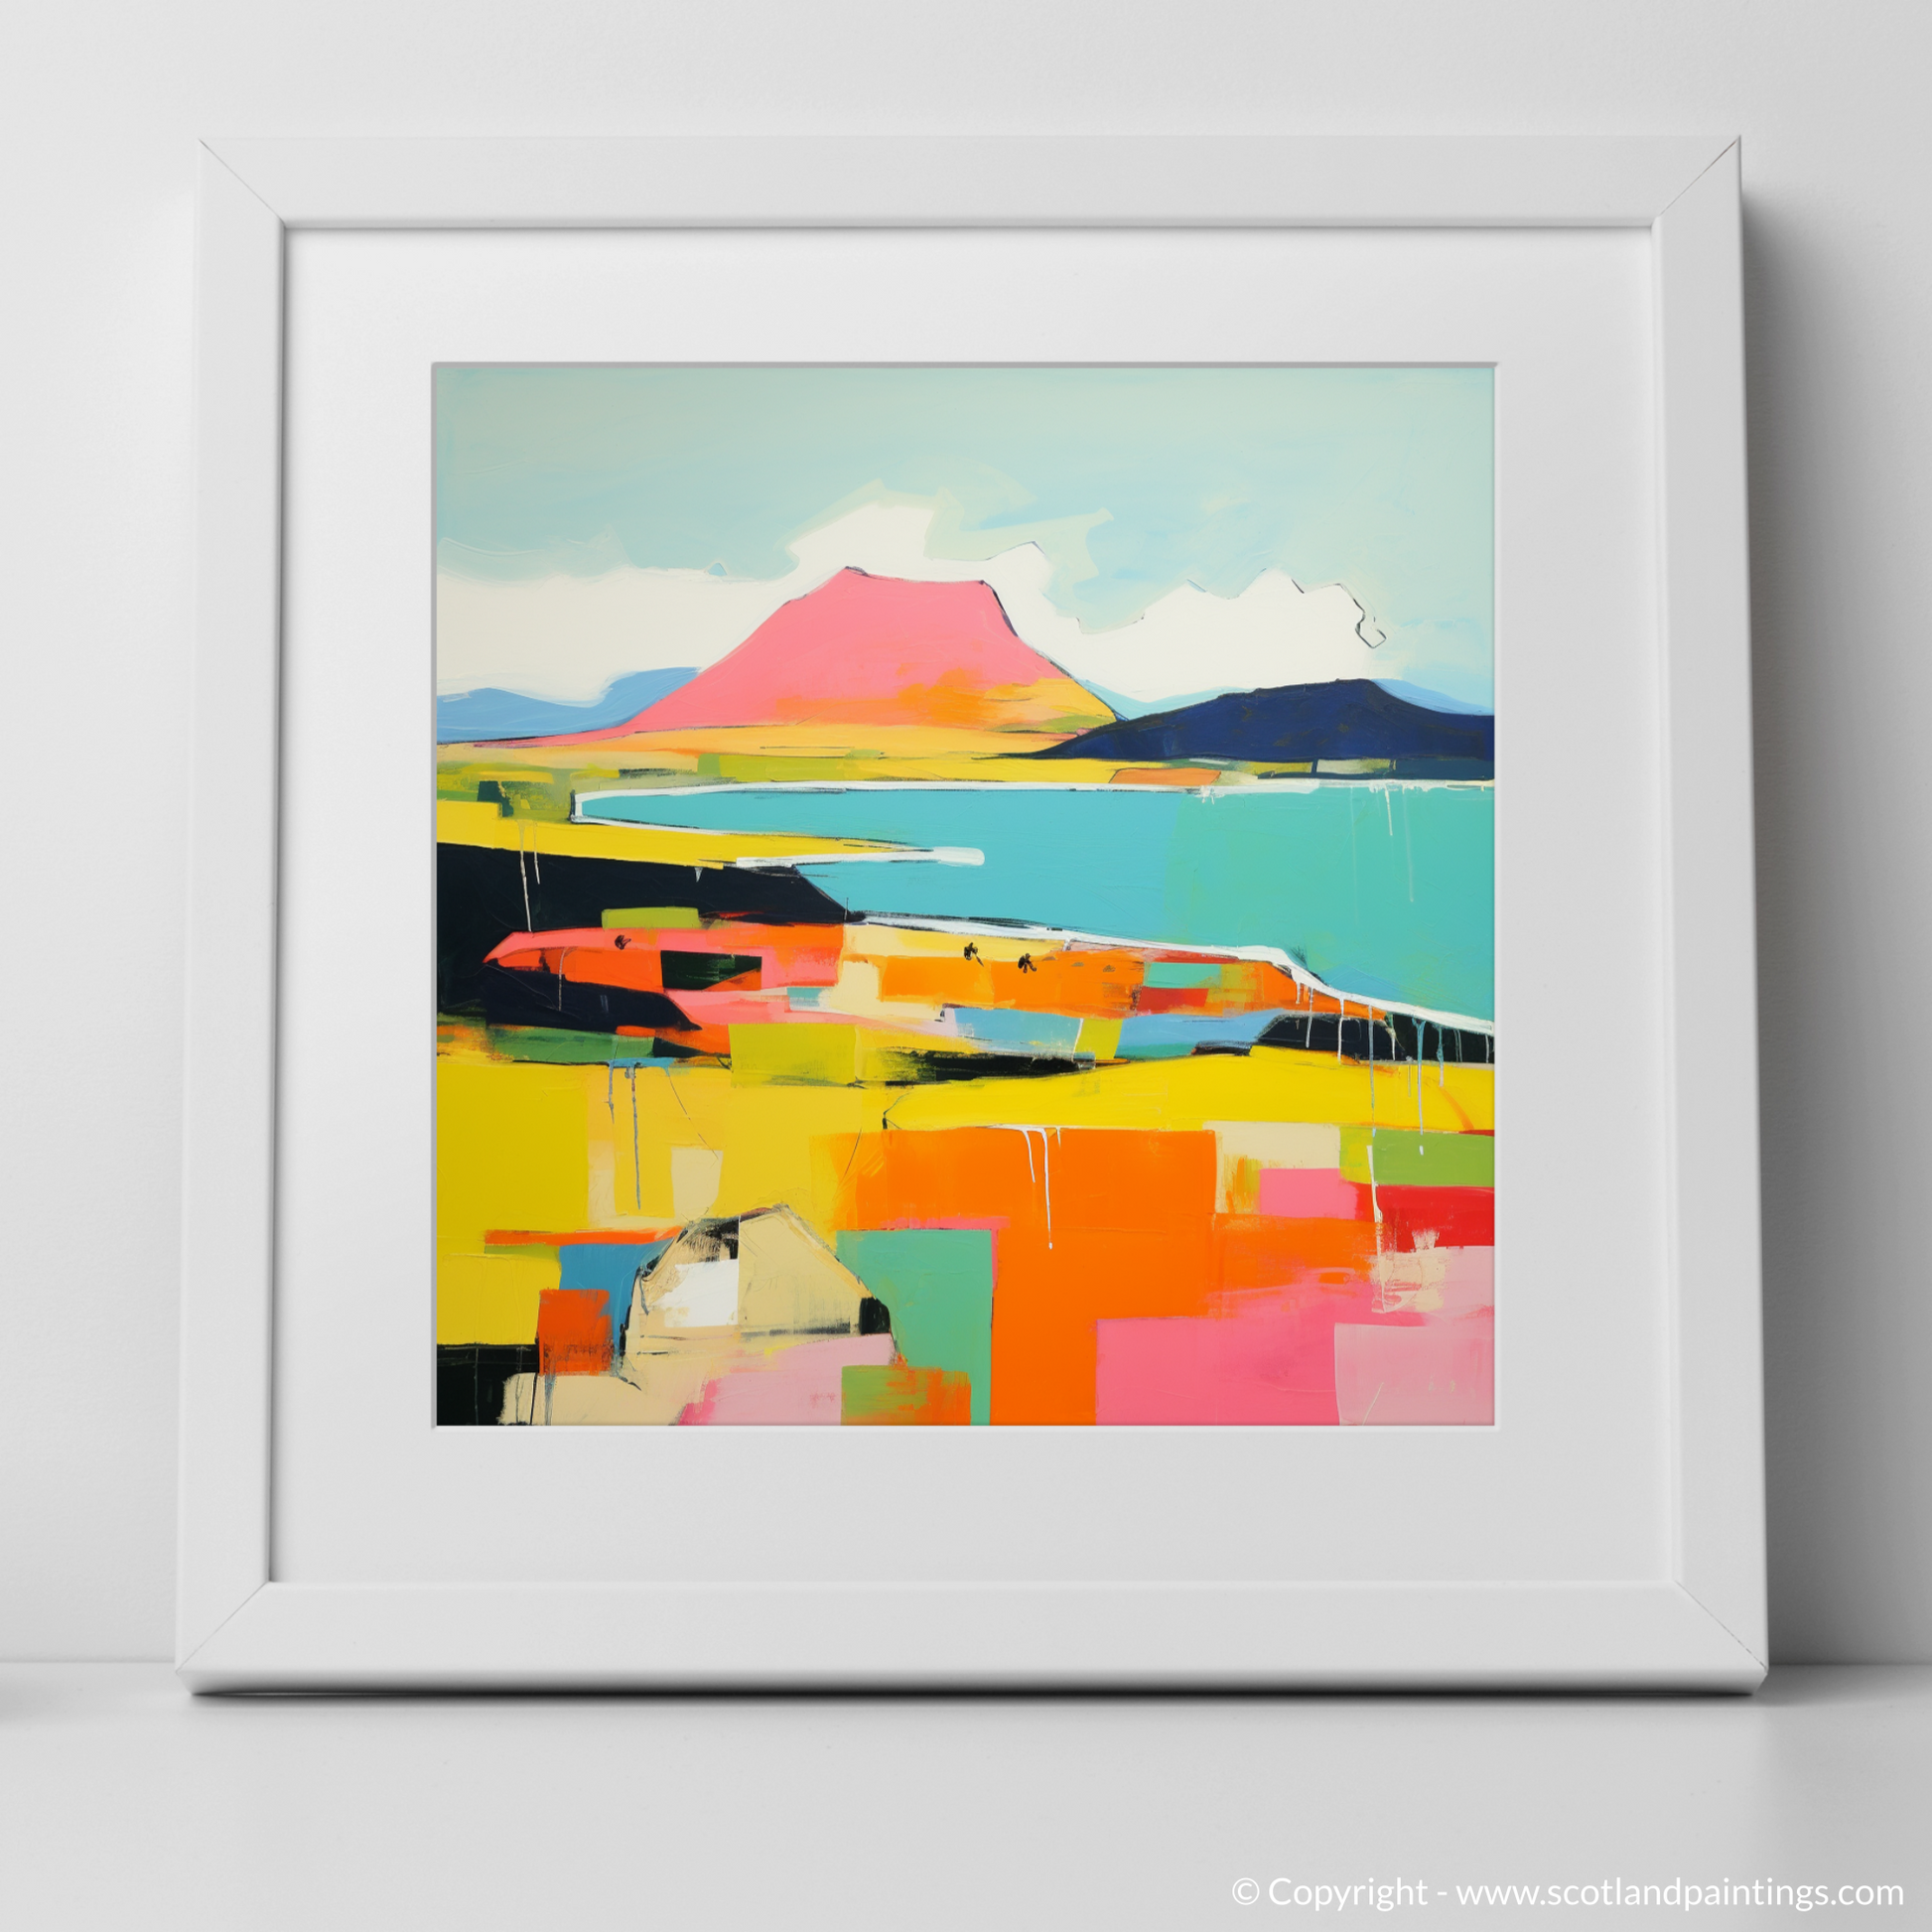 Art Print of Isle of Arran, Firth of Clyde in summer with a white frame